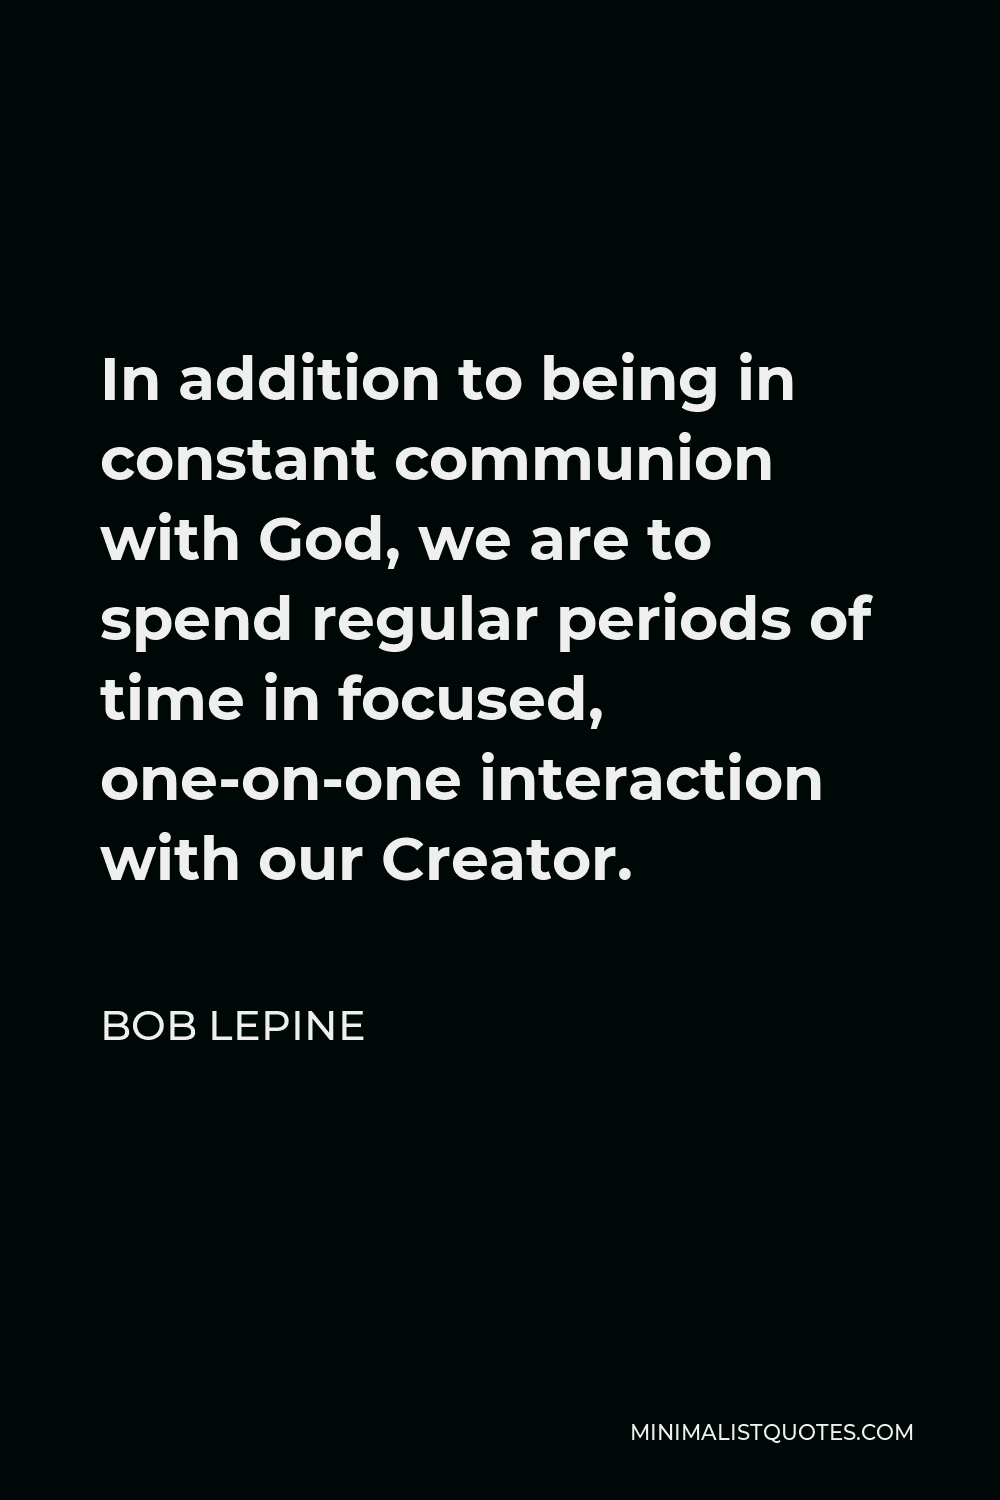 Bob Lepine Quote - In addition to being in constant communion with God, we are to spend regular periods of time in focused, one-on-one interaction with our Creator.